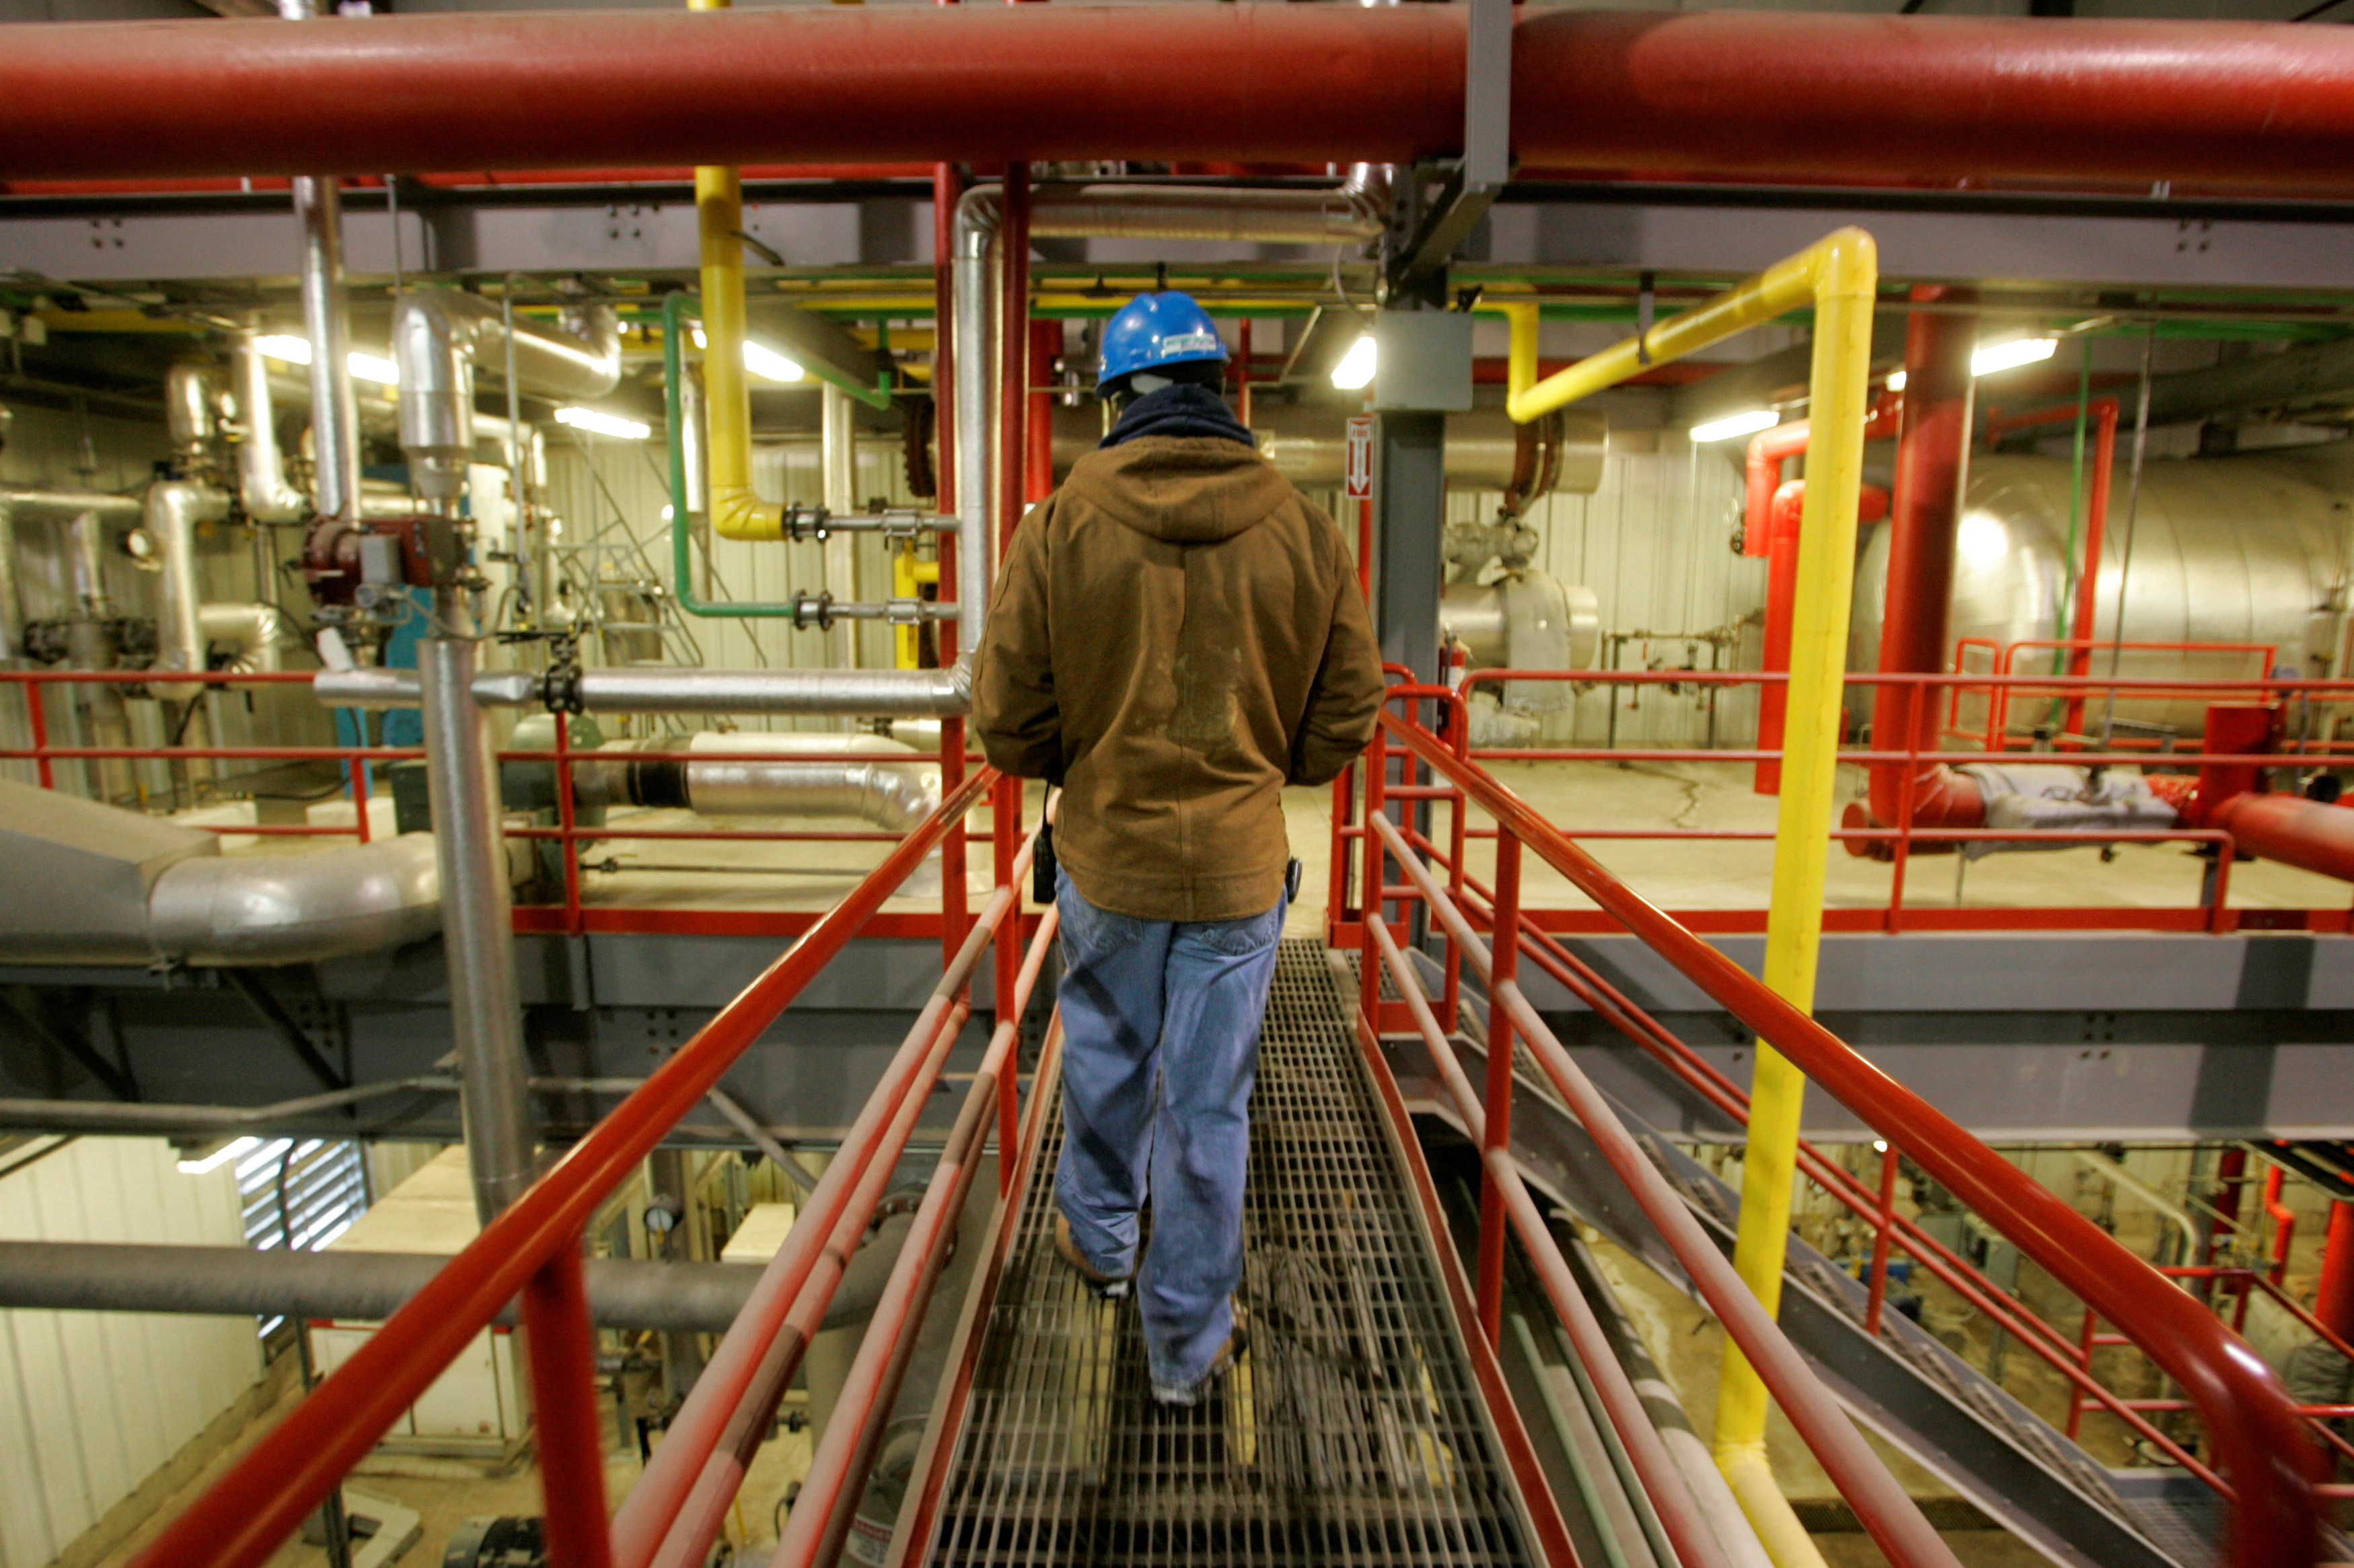 Travis Harrison walks among the pipes that process corn into ethanol at the Lincolnway Energy plant in Nevada, Iowa